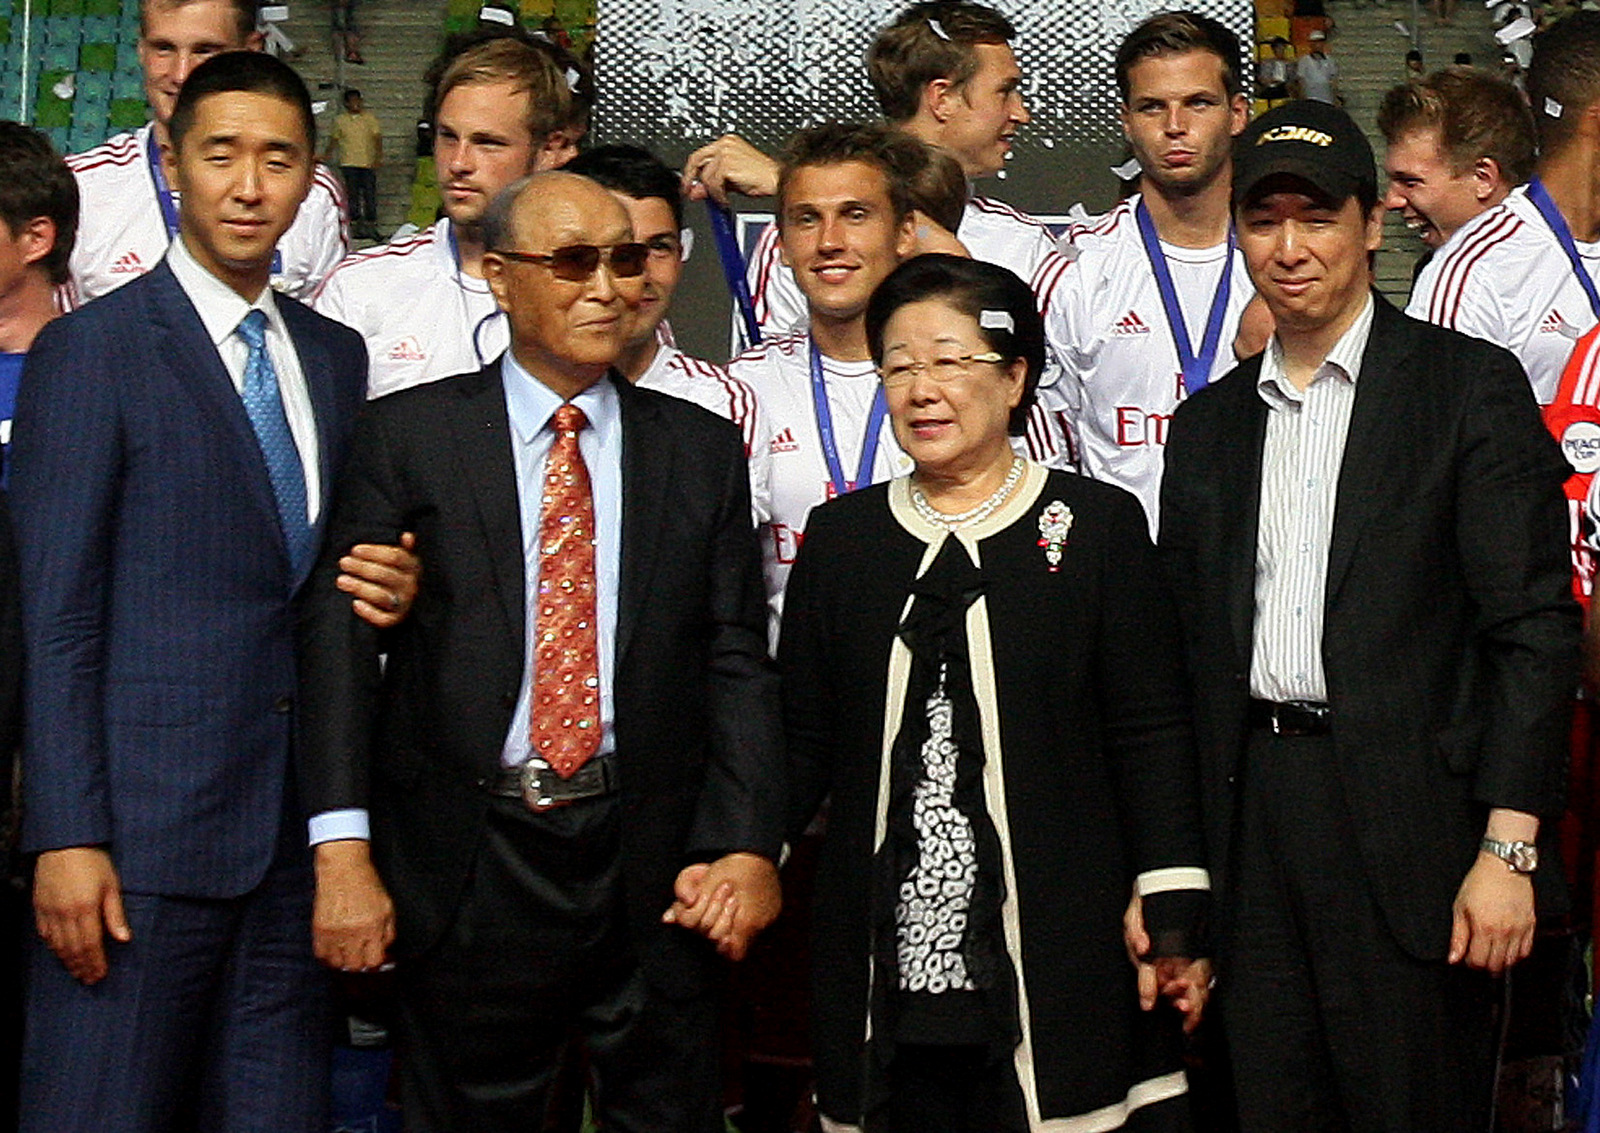 Rev. Sun Myung Moon, the founder of the Unification Church, second from left, poses with his wife Hak Ja Han Moon, second from right, his sons Hyung-jin Moon, left, and Kook Jin Moon during the closing ceremony of the 2012 Peace Cup Suwon at Suwon World Cup Stadium in Suwon, South Korea, July 22, 2012. (AP/Ahn Young-joon)